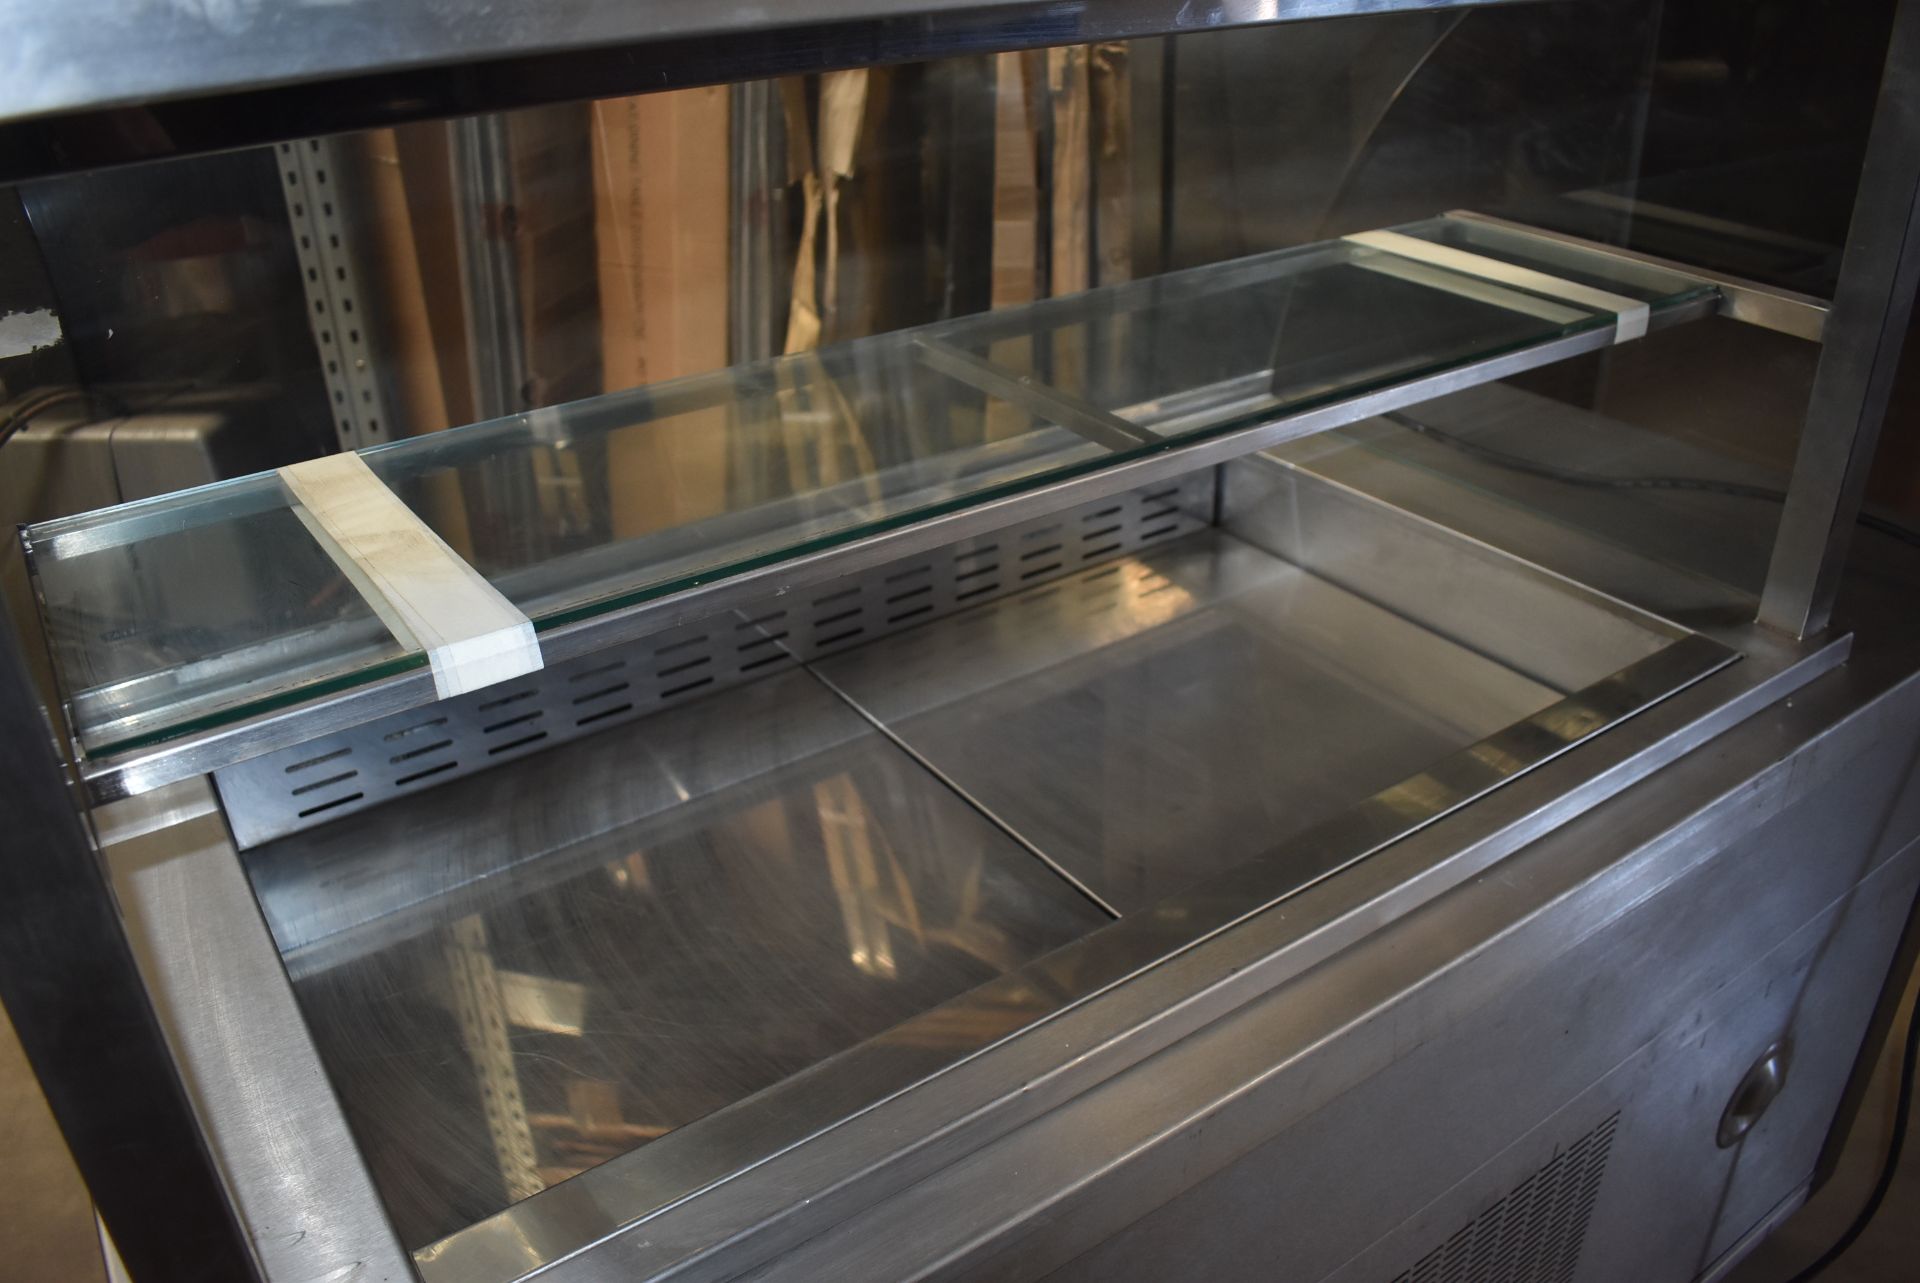 1 x Moffat Refrigerated Display Unit on Castors - Stainless Steel With Glass Display For Cold - Image 13 of 14